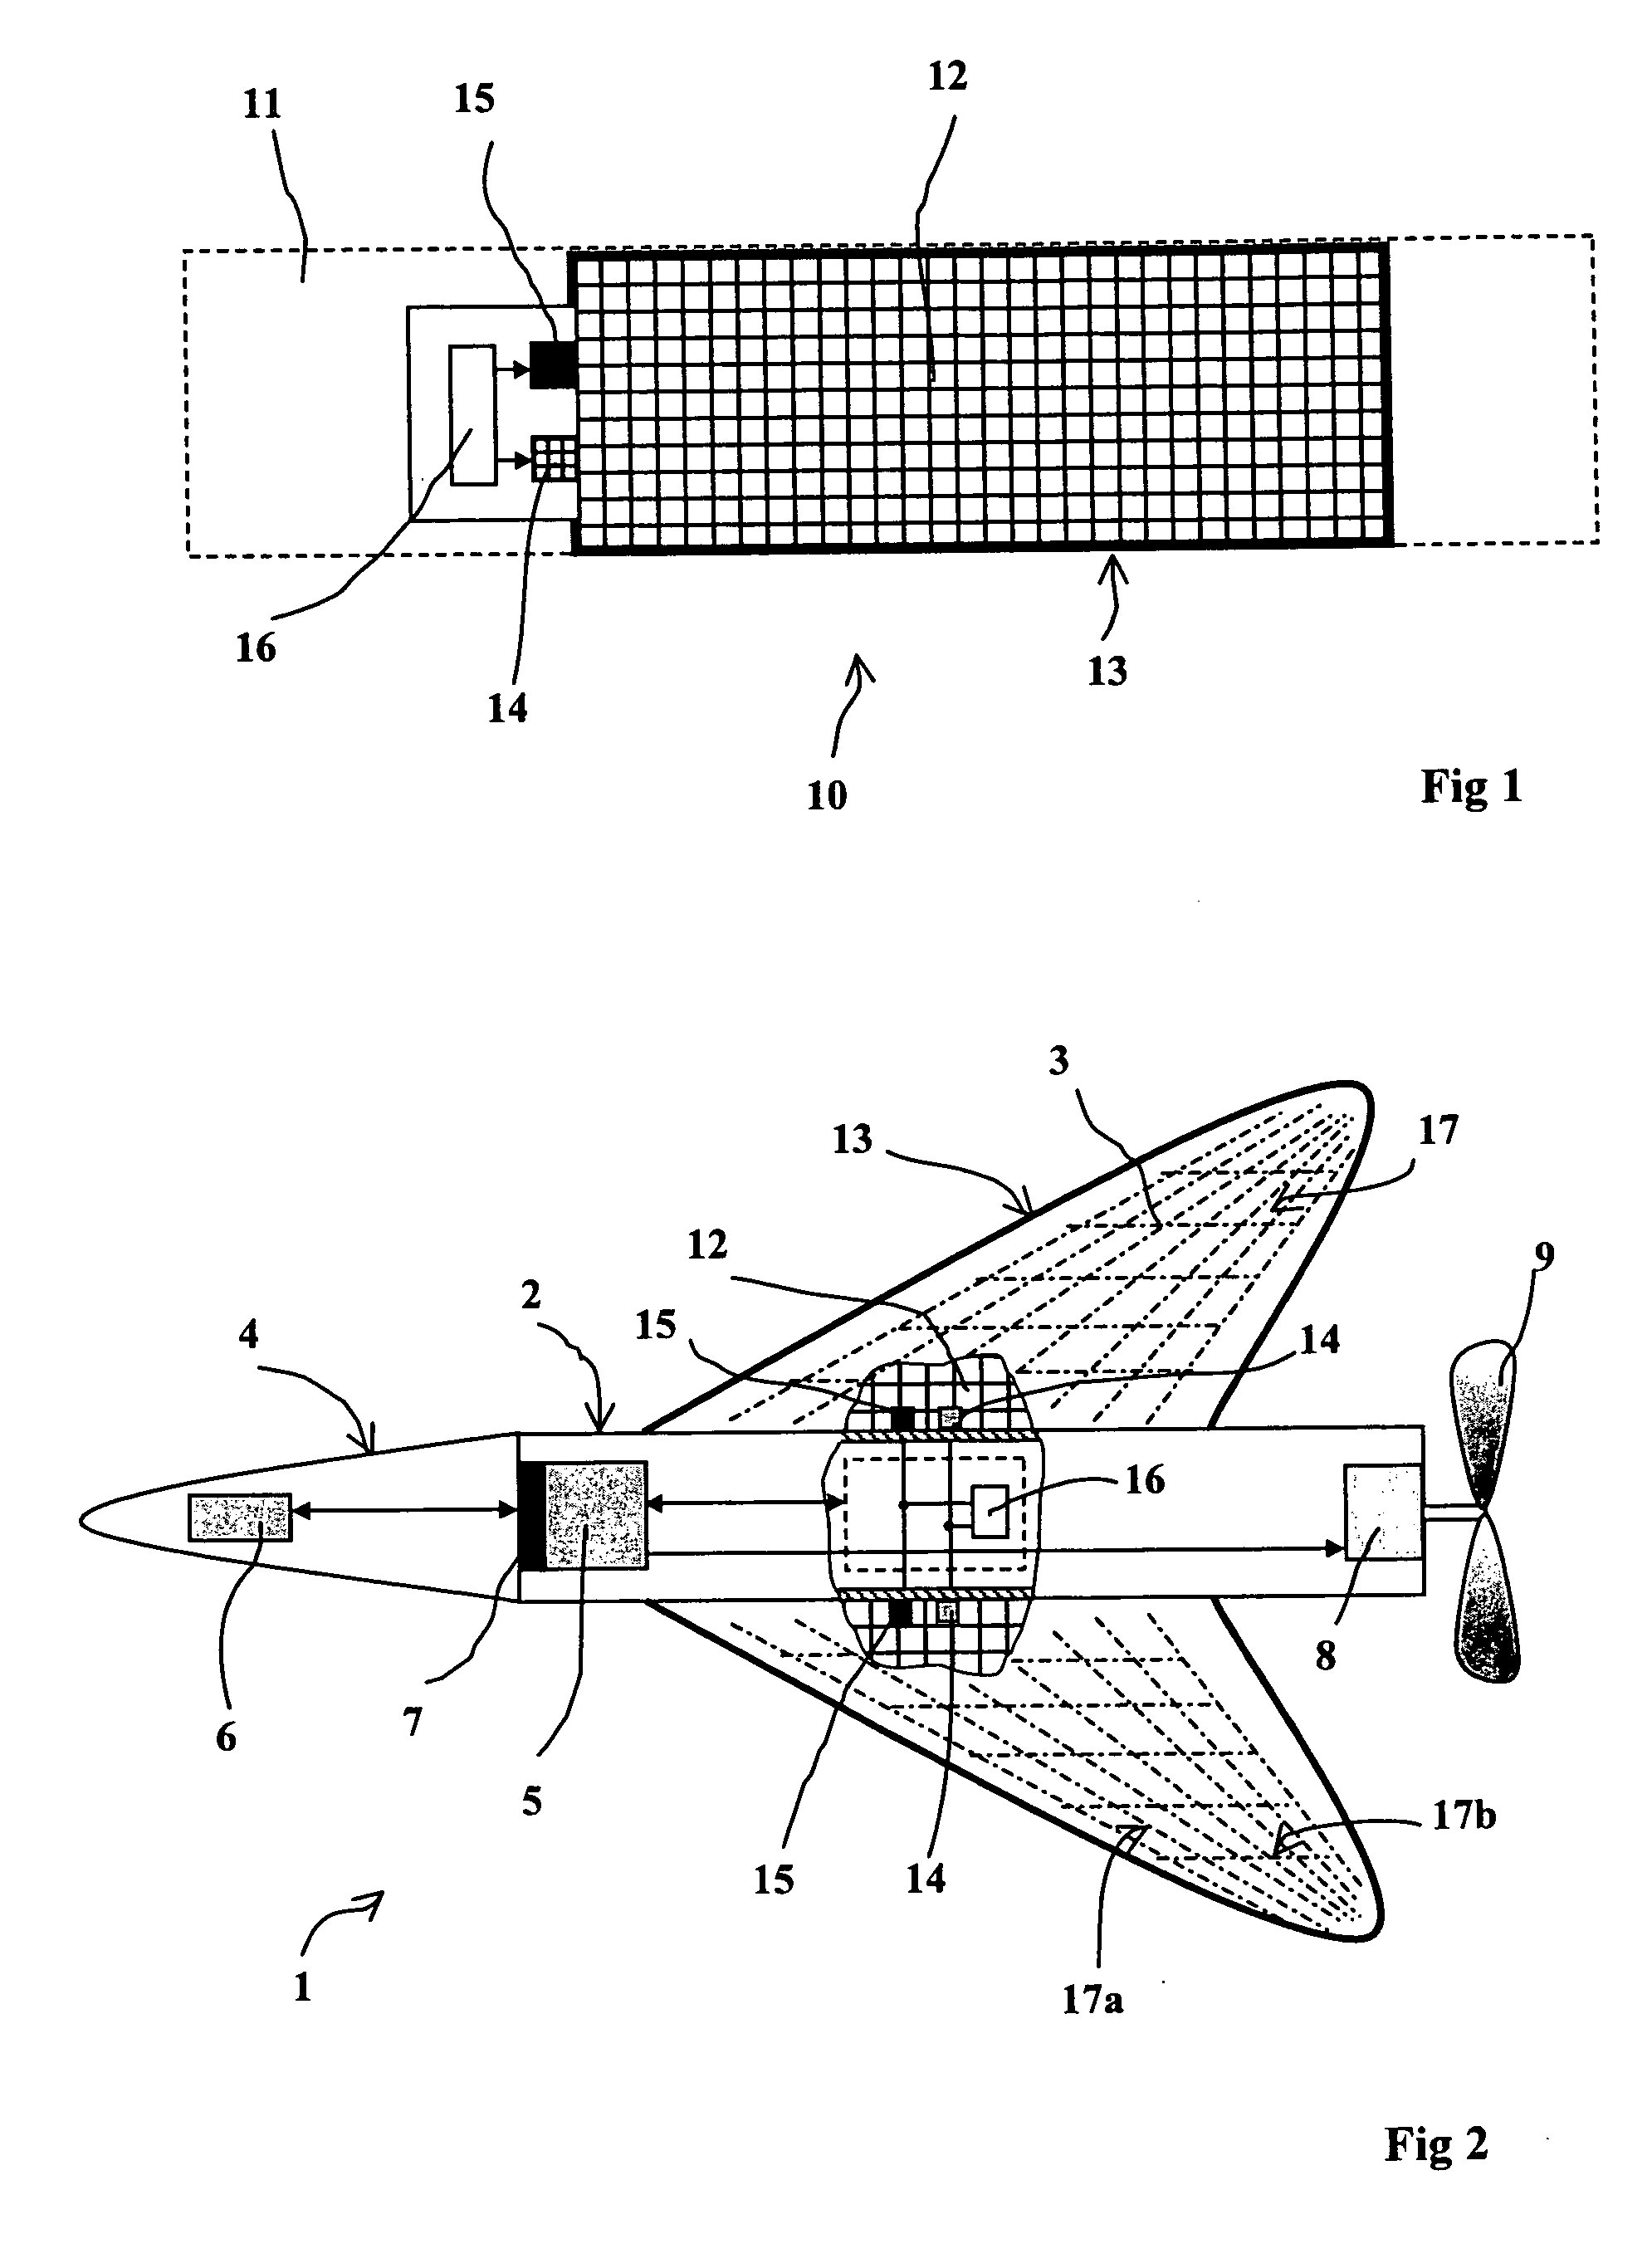 Piece of ammunition or ammunition component comprising a structural energetic material